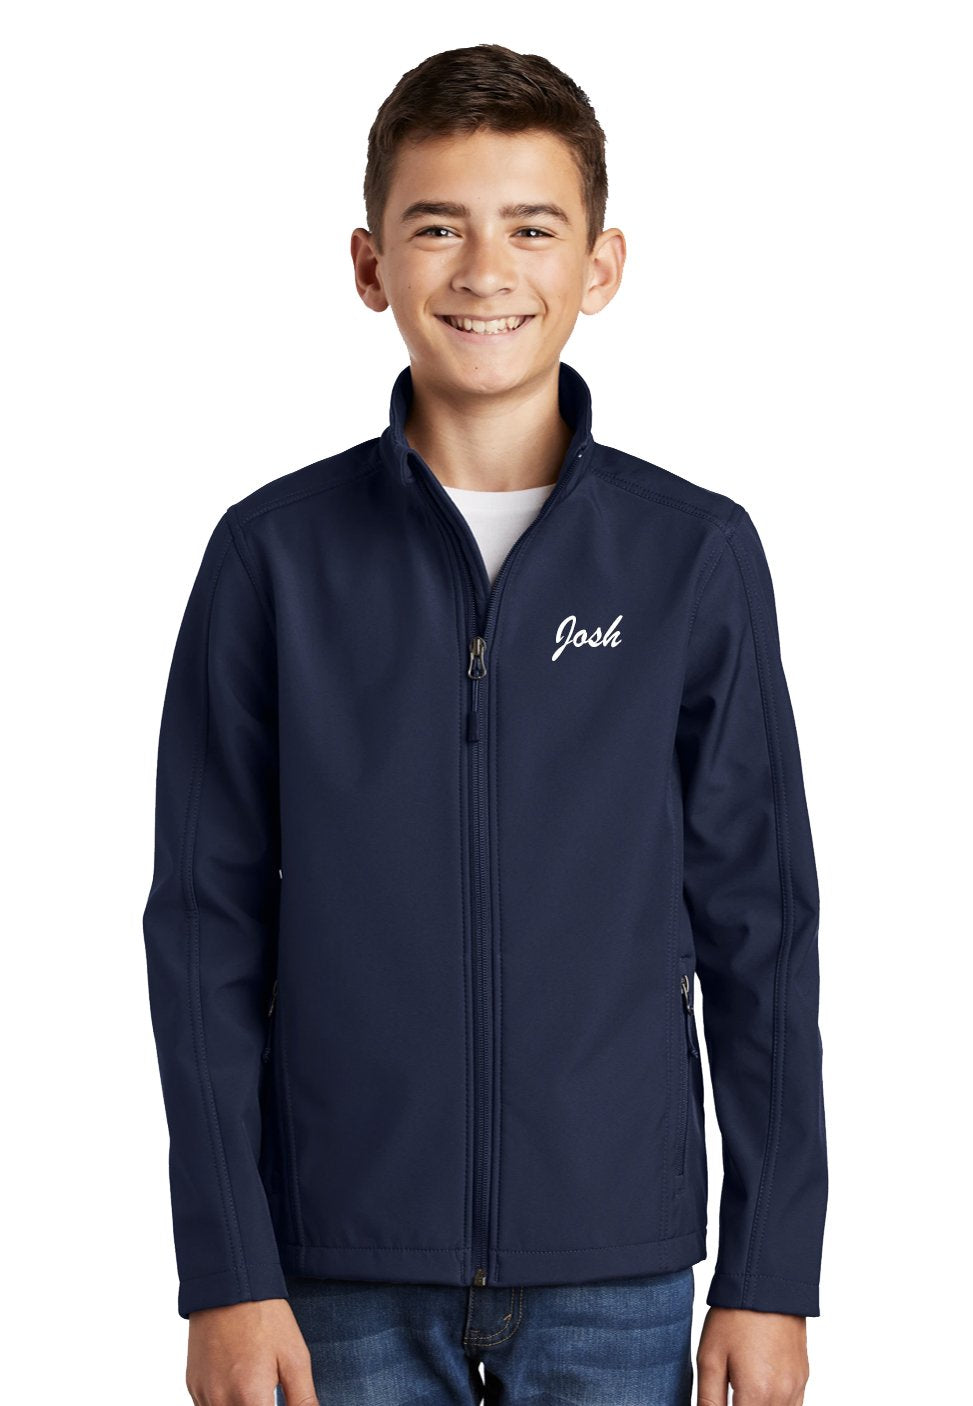 GlenAyre Equestrian Port Authority® Youth Core Soft Shell Jacket - Navy